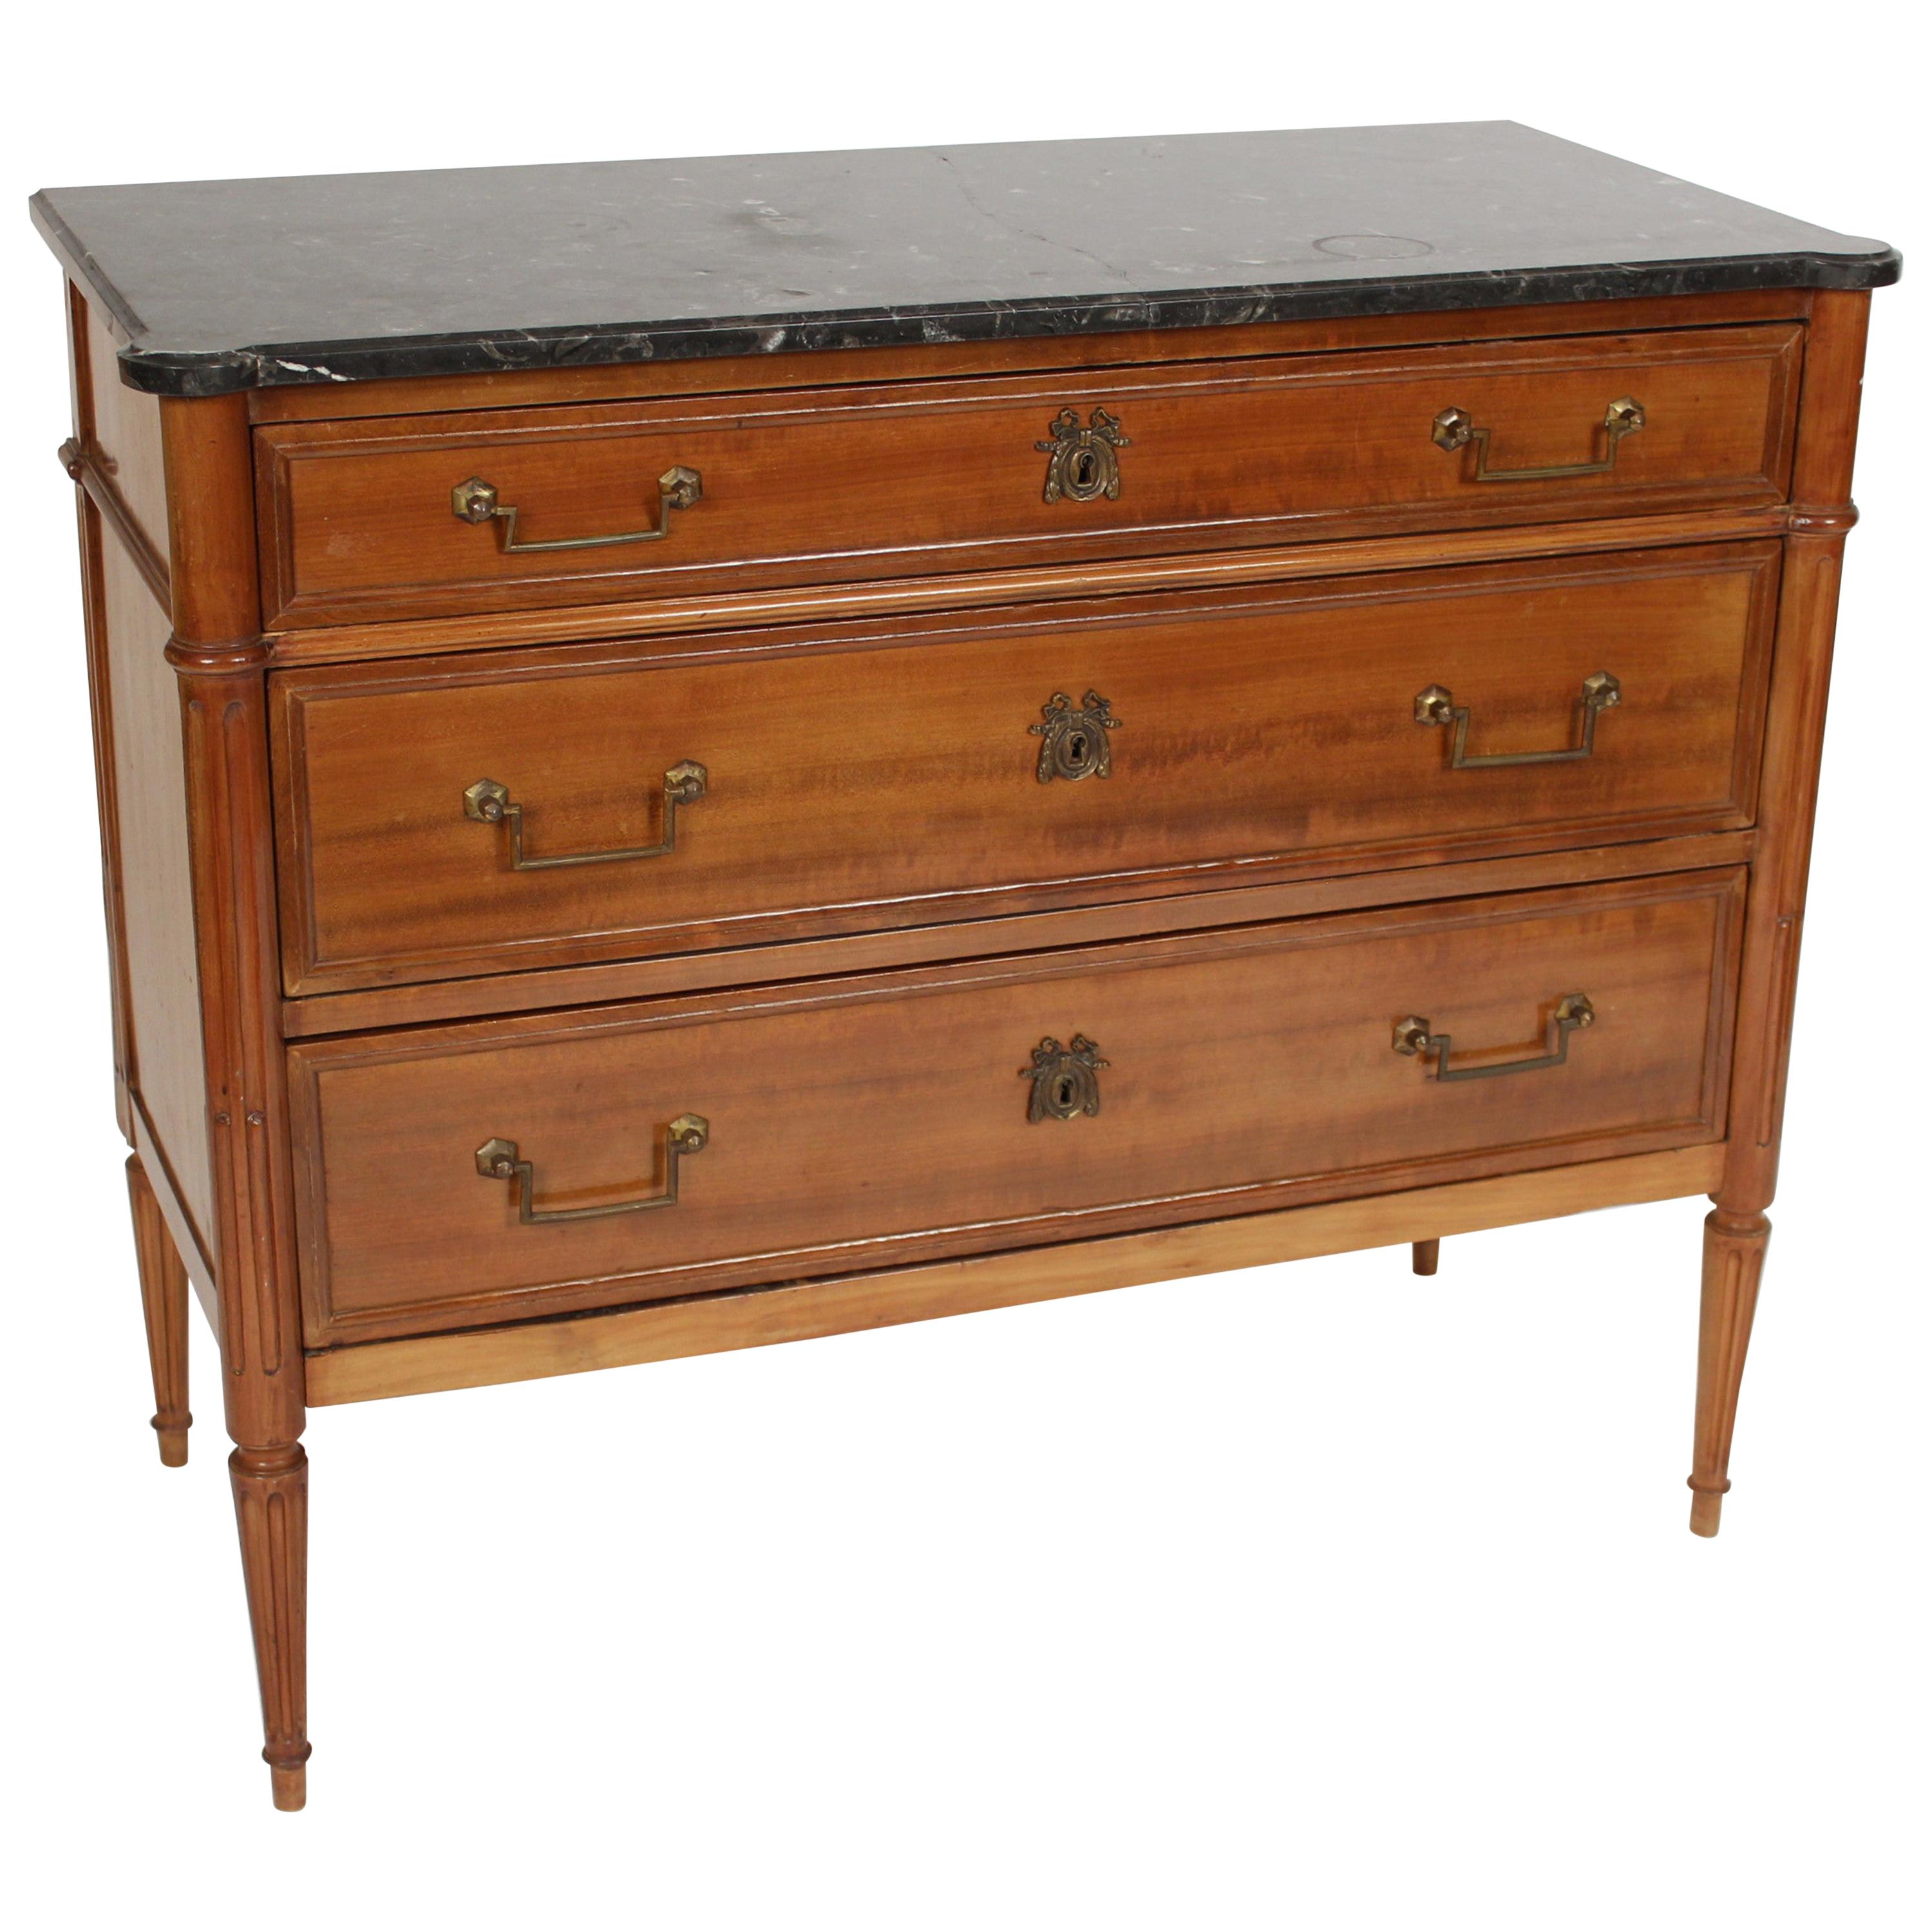 Antique Louis XVI Style Mahogany Chest of Drawers with a Marble Top